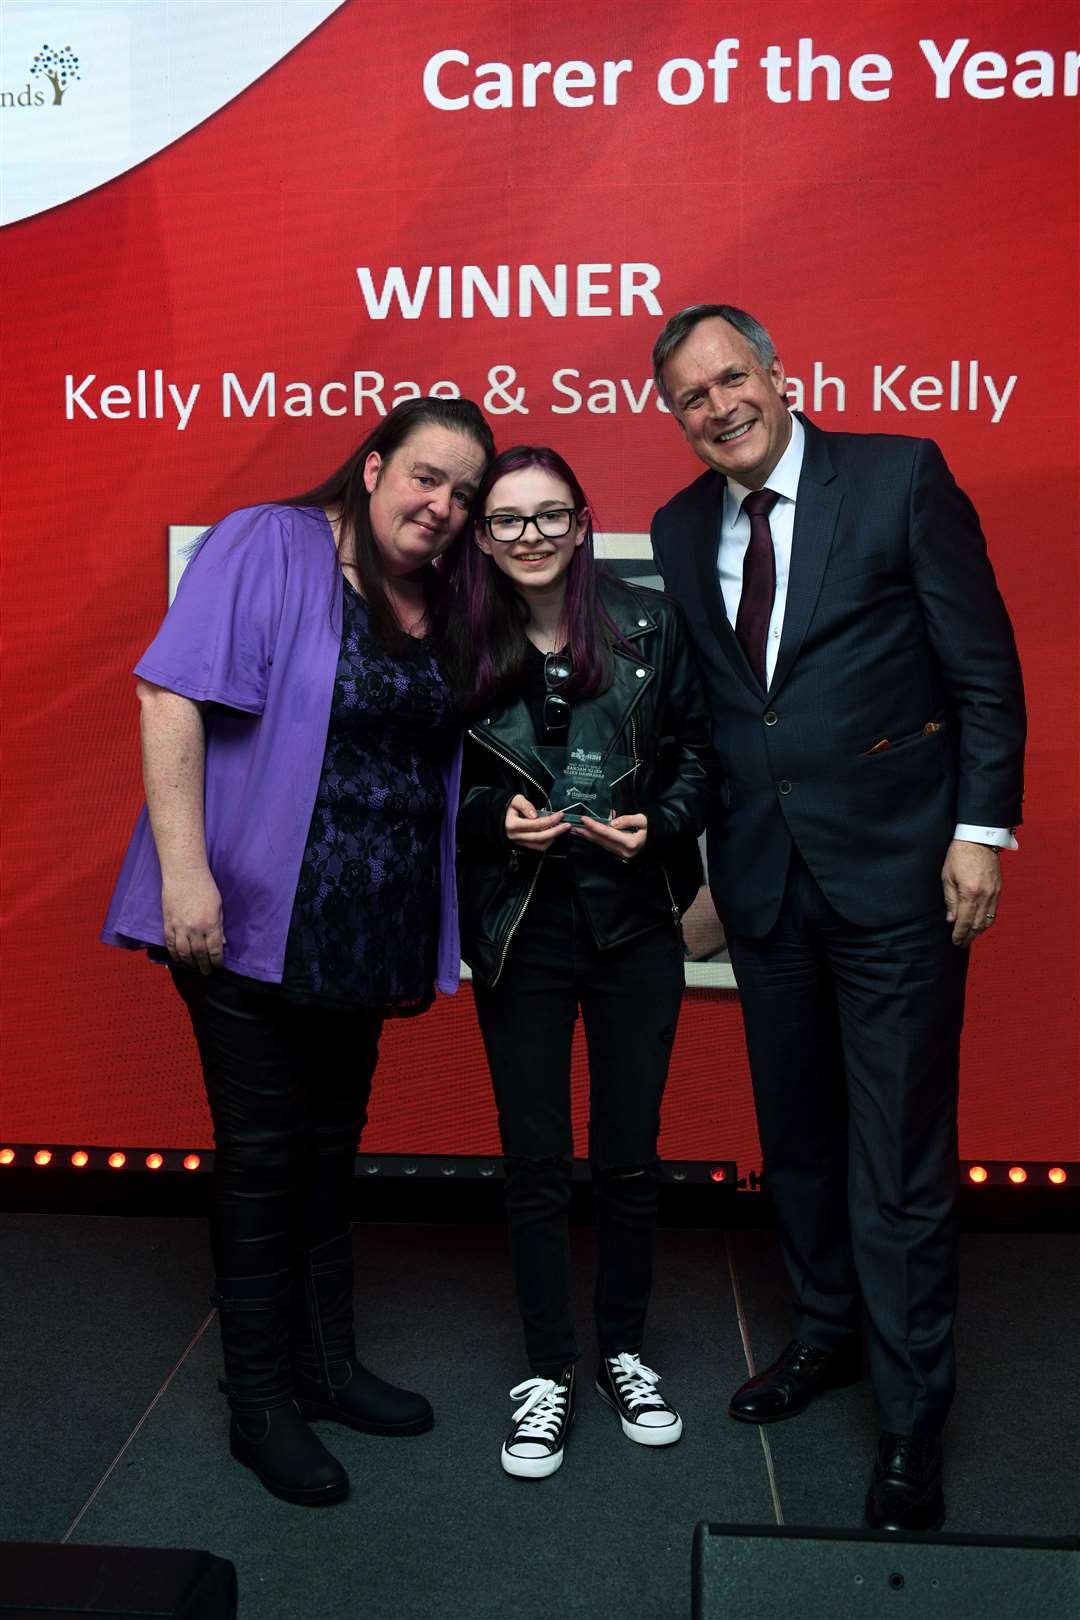 Kelly MacRae and Savannah Kelly won the Carer of the Year Award sponsored by Parklands. Picture: James Mackenzie.